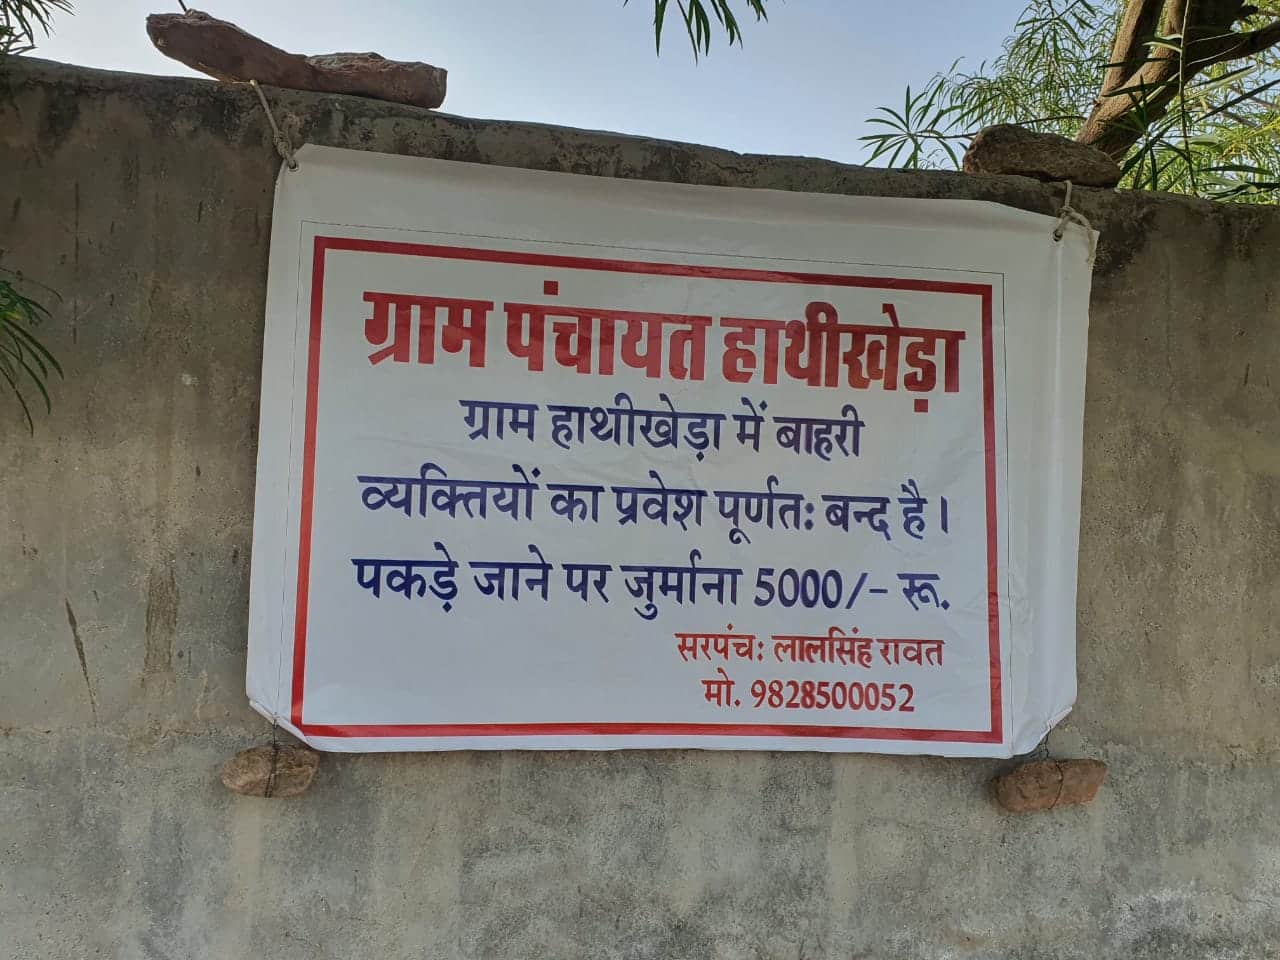 A sign warns that outsiders caught within village limits will be fined Rs 5,000 (Image: Kshitiz Gaur)